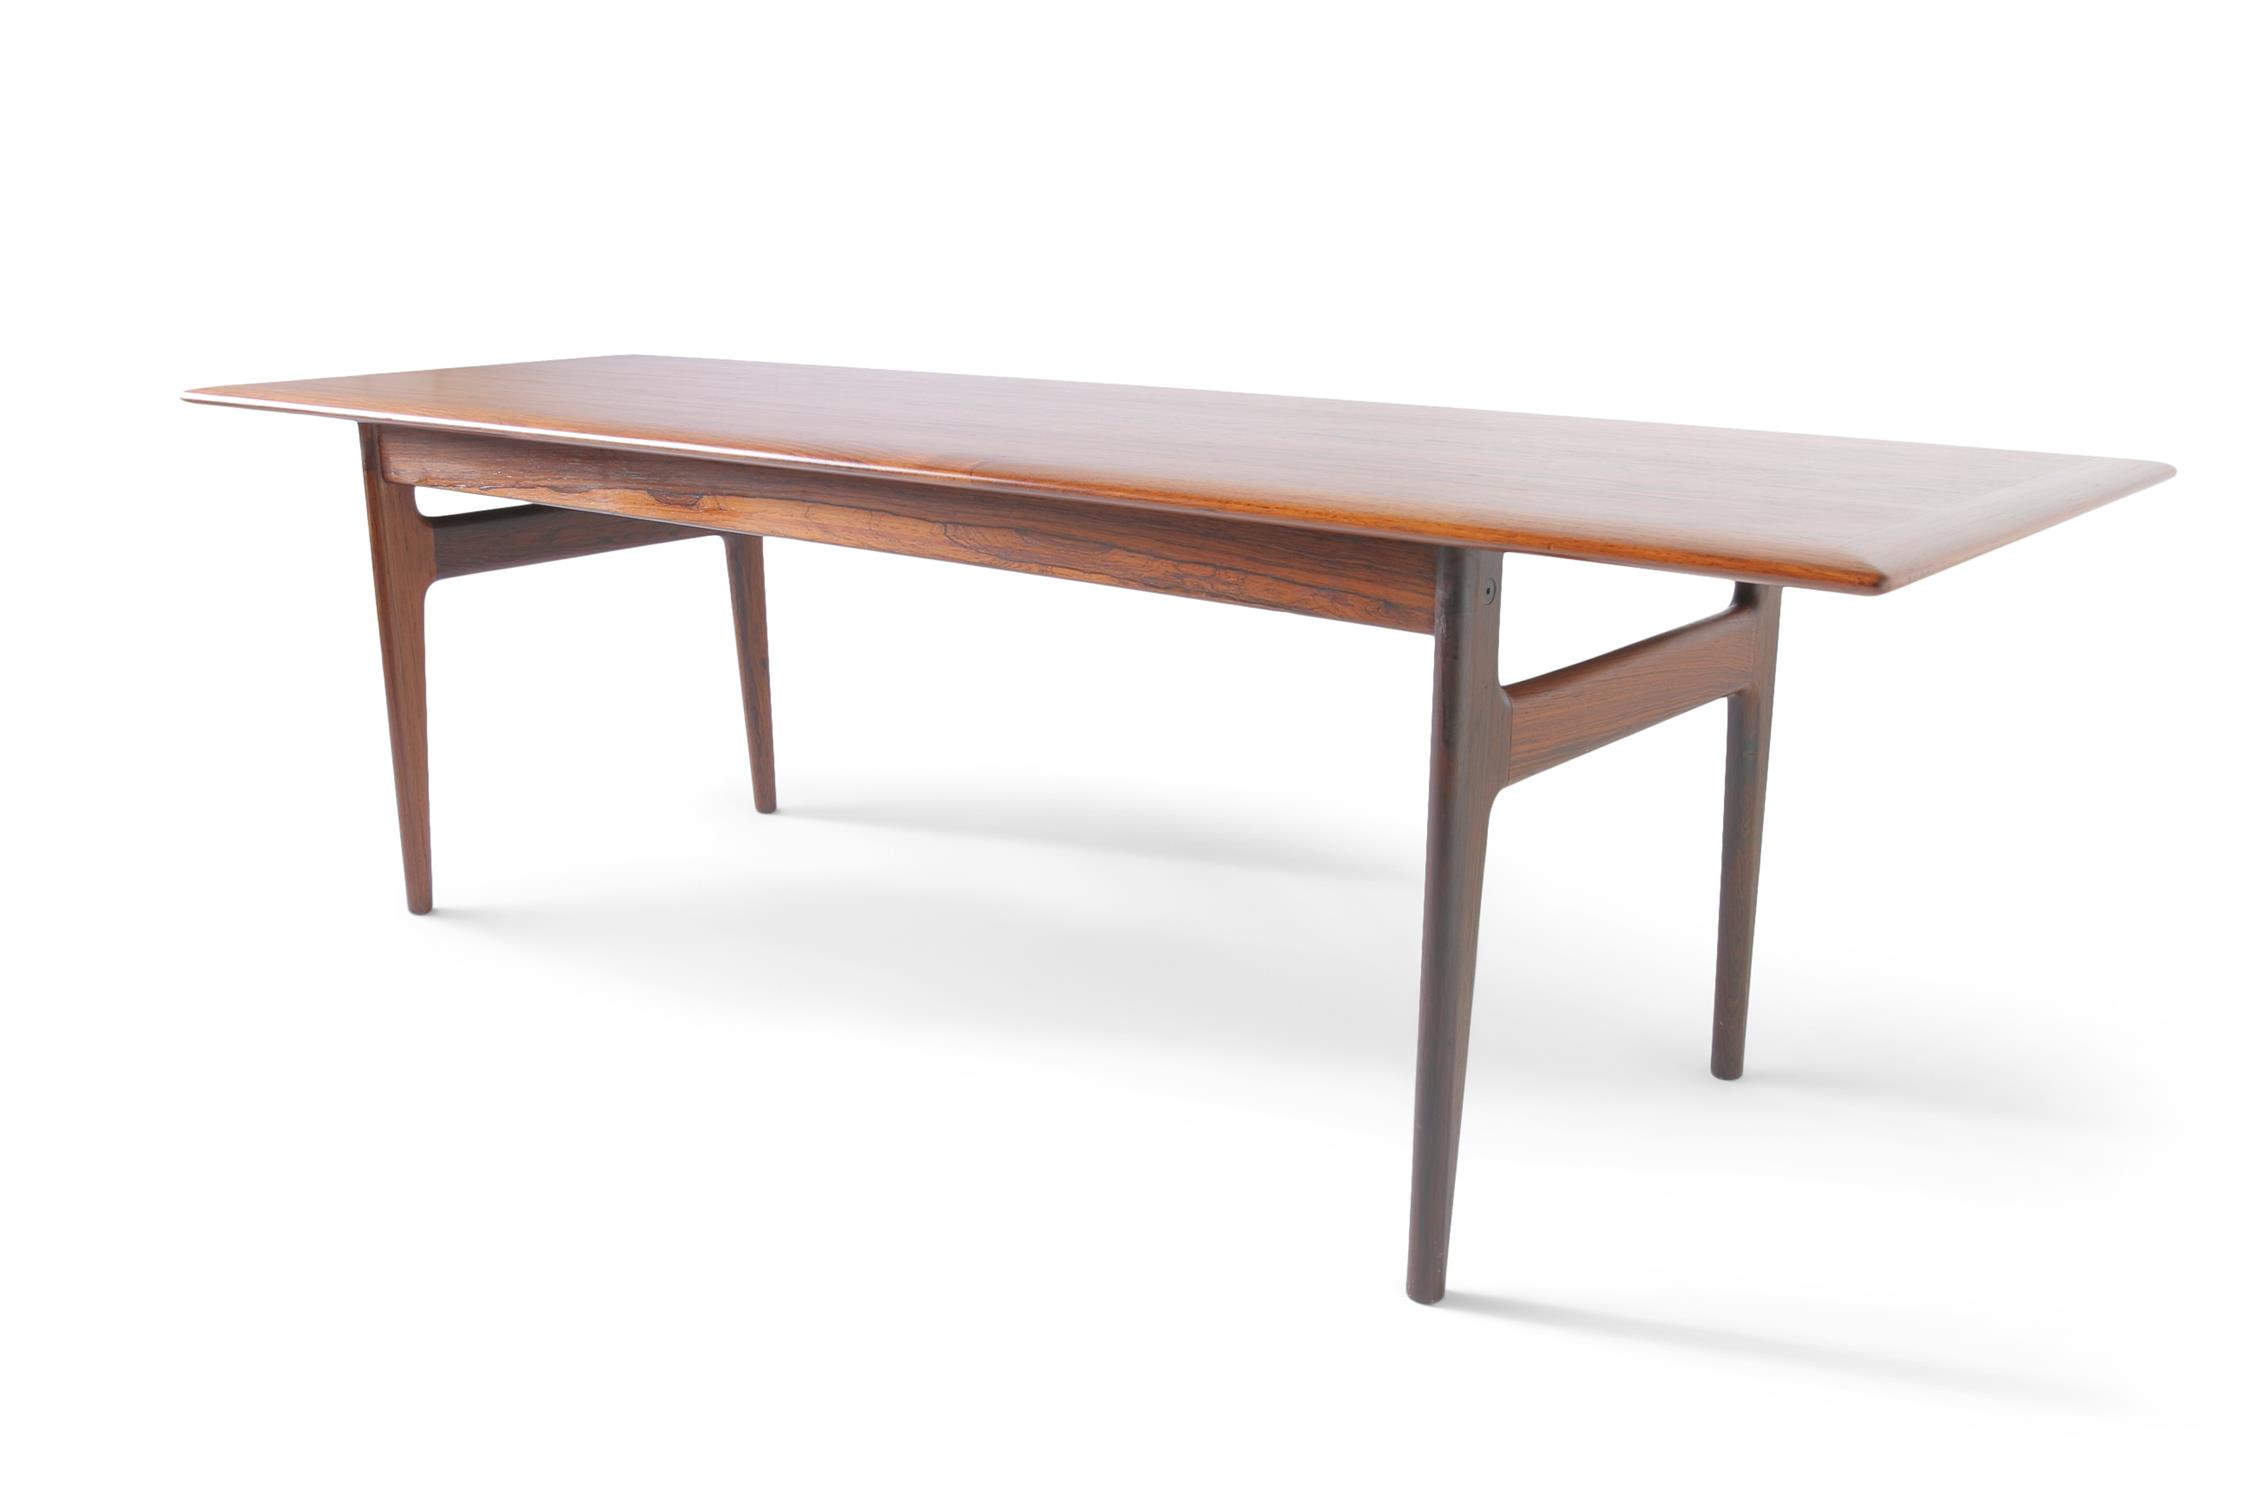 JOHANNES ANDERSEN A rosewood coffee table by Johannes Andersen for CFC. Silkeborg, Denmark, c.1960. - Image 2 of 7